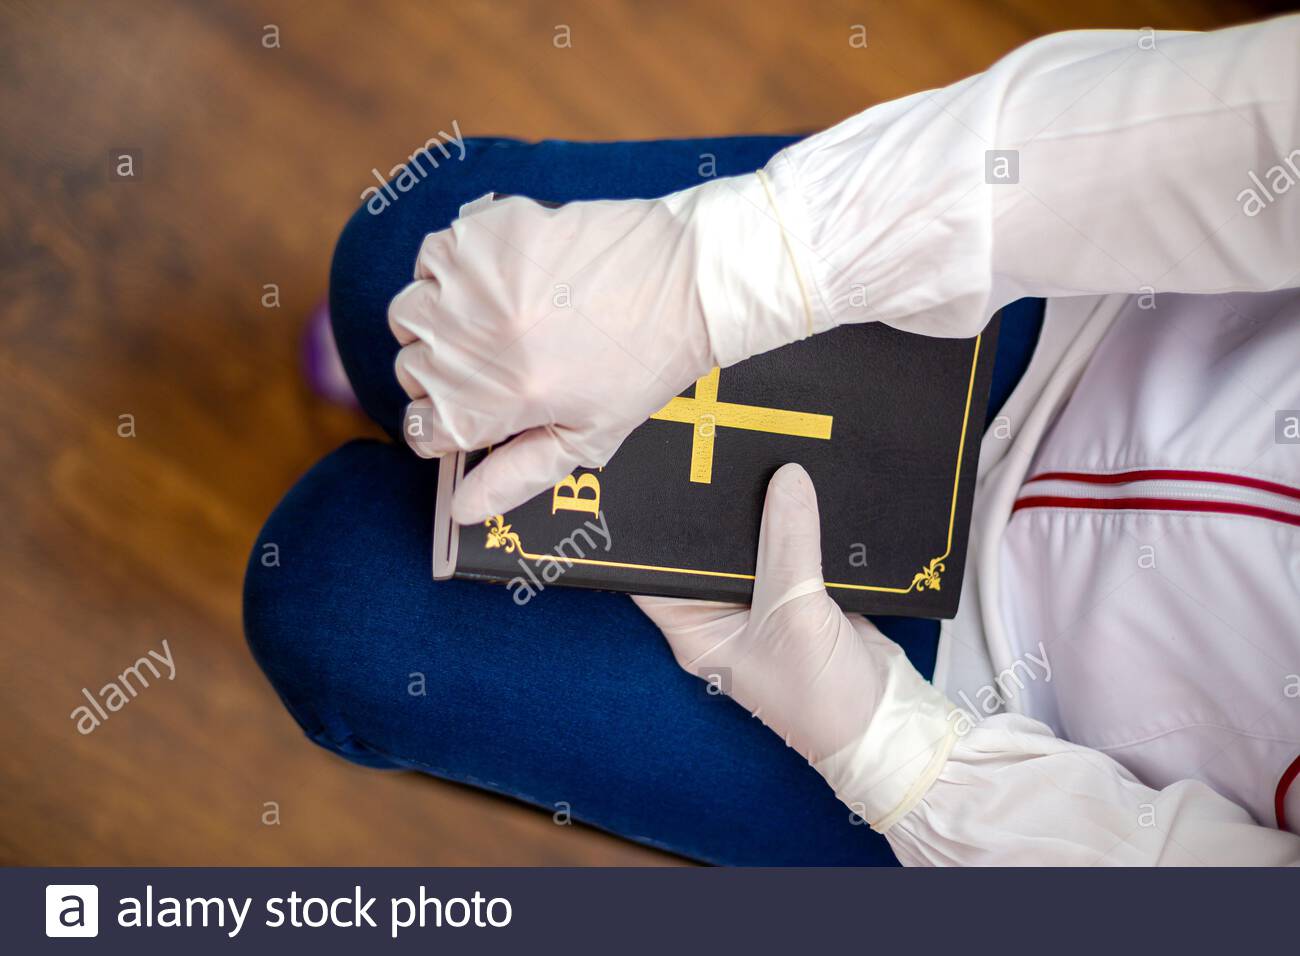 person-nurse-or-doctor-with-gloves-stand-in-prayer-with-bible-in-hand-the-infected-person-stands-in-prayer-with-the-bible-in-his-hand-2BC0R9F.jpg